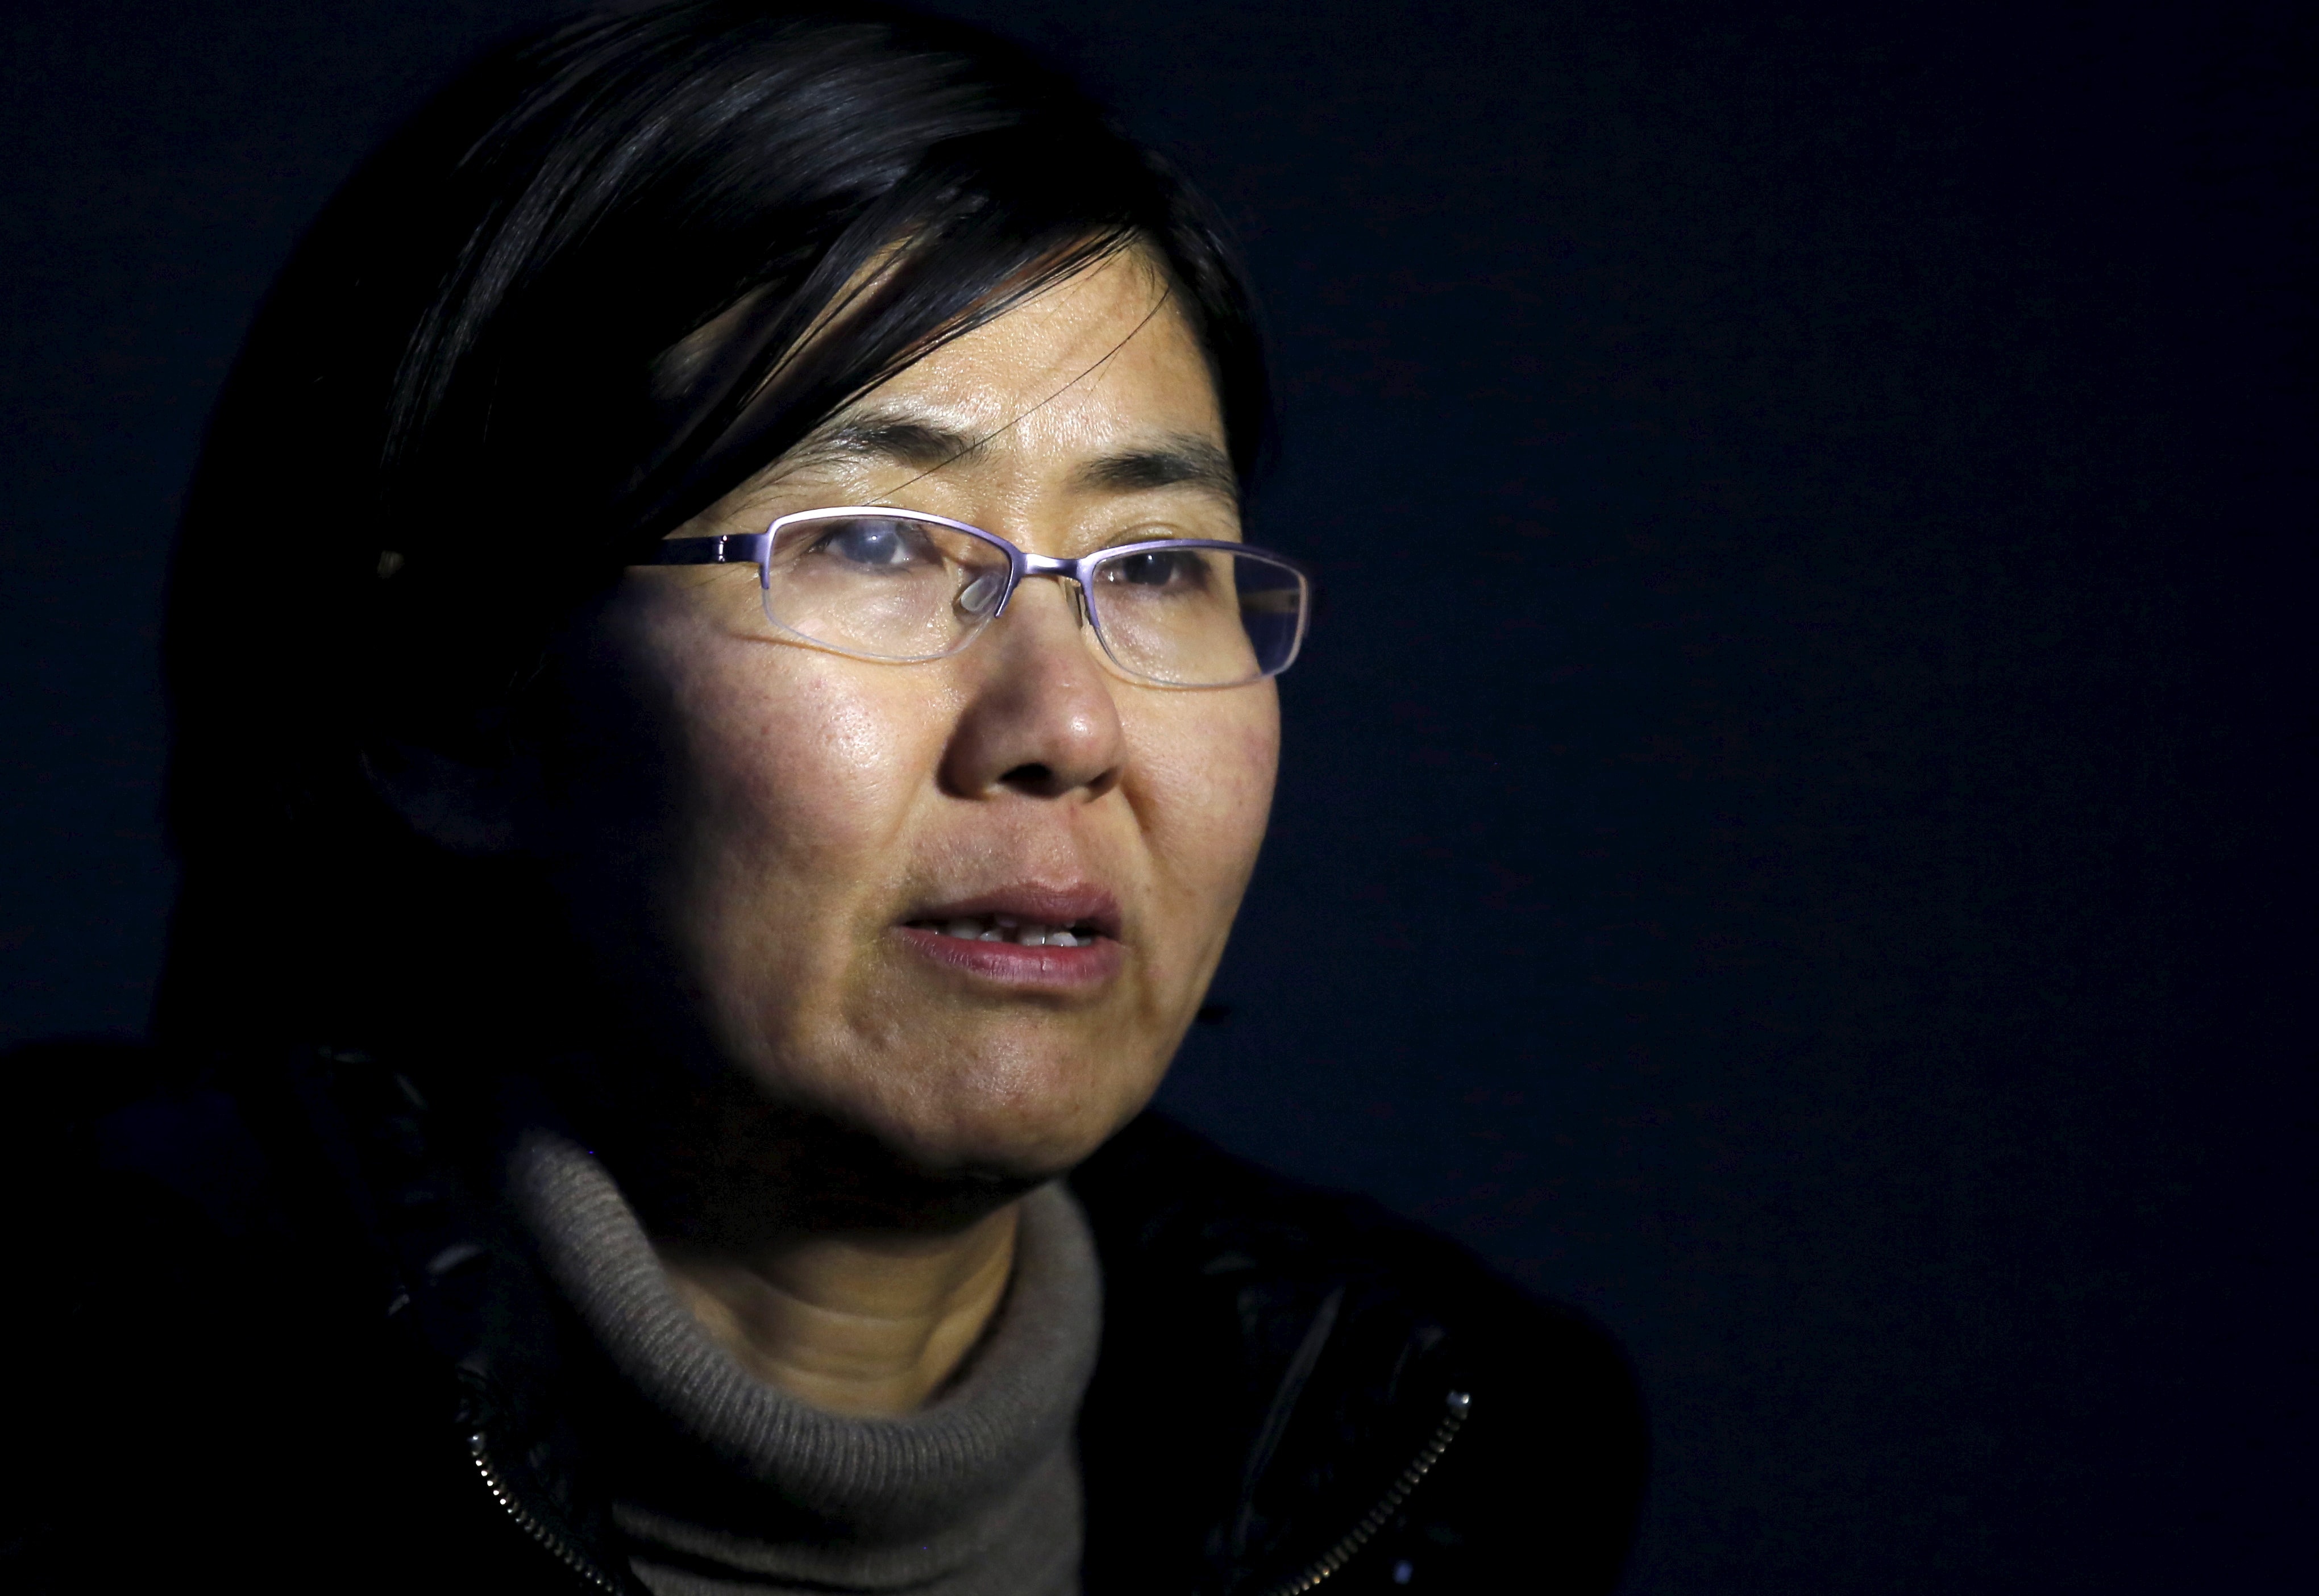 March 2014 file photo of lawyer Wang Yu, who was detained in Beijing on 9 July 2015 along with her husband and colleagues., REUTERS/Kim Kyung-Hoon